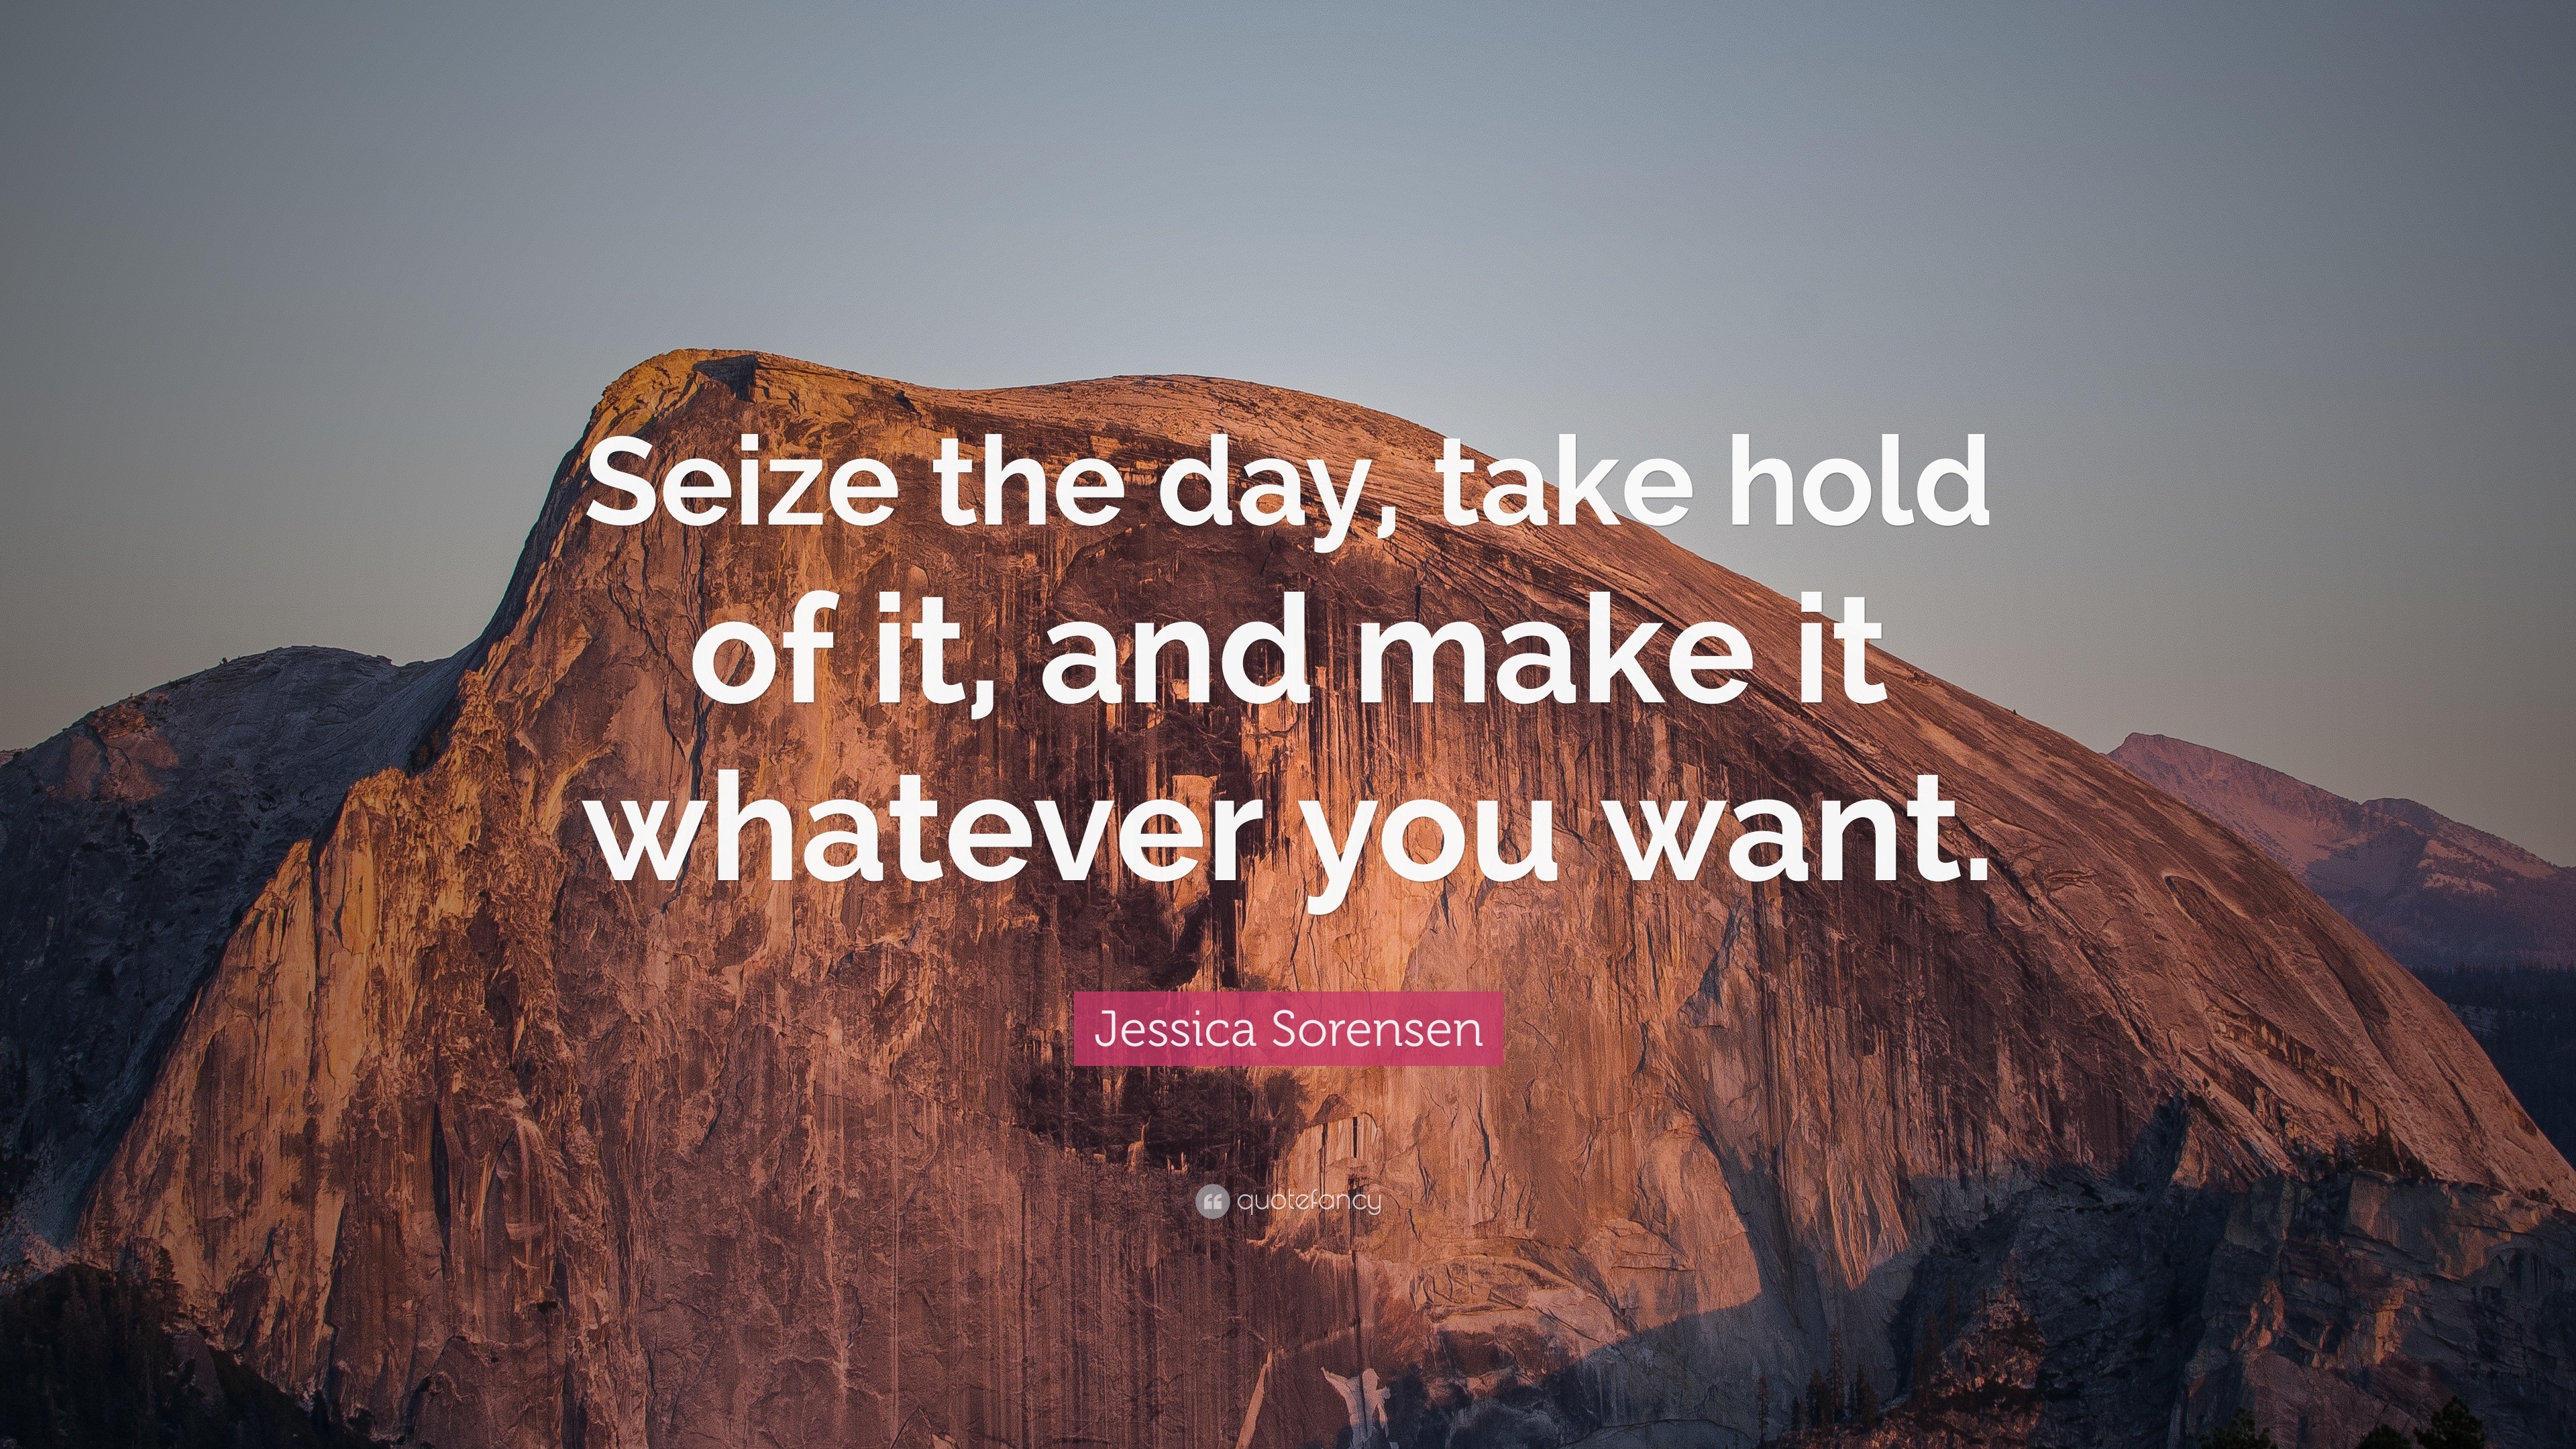 40 Motivational Quotes to Inspire You to Seize the Day